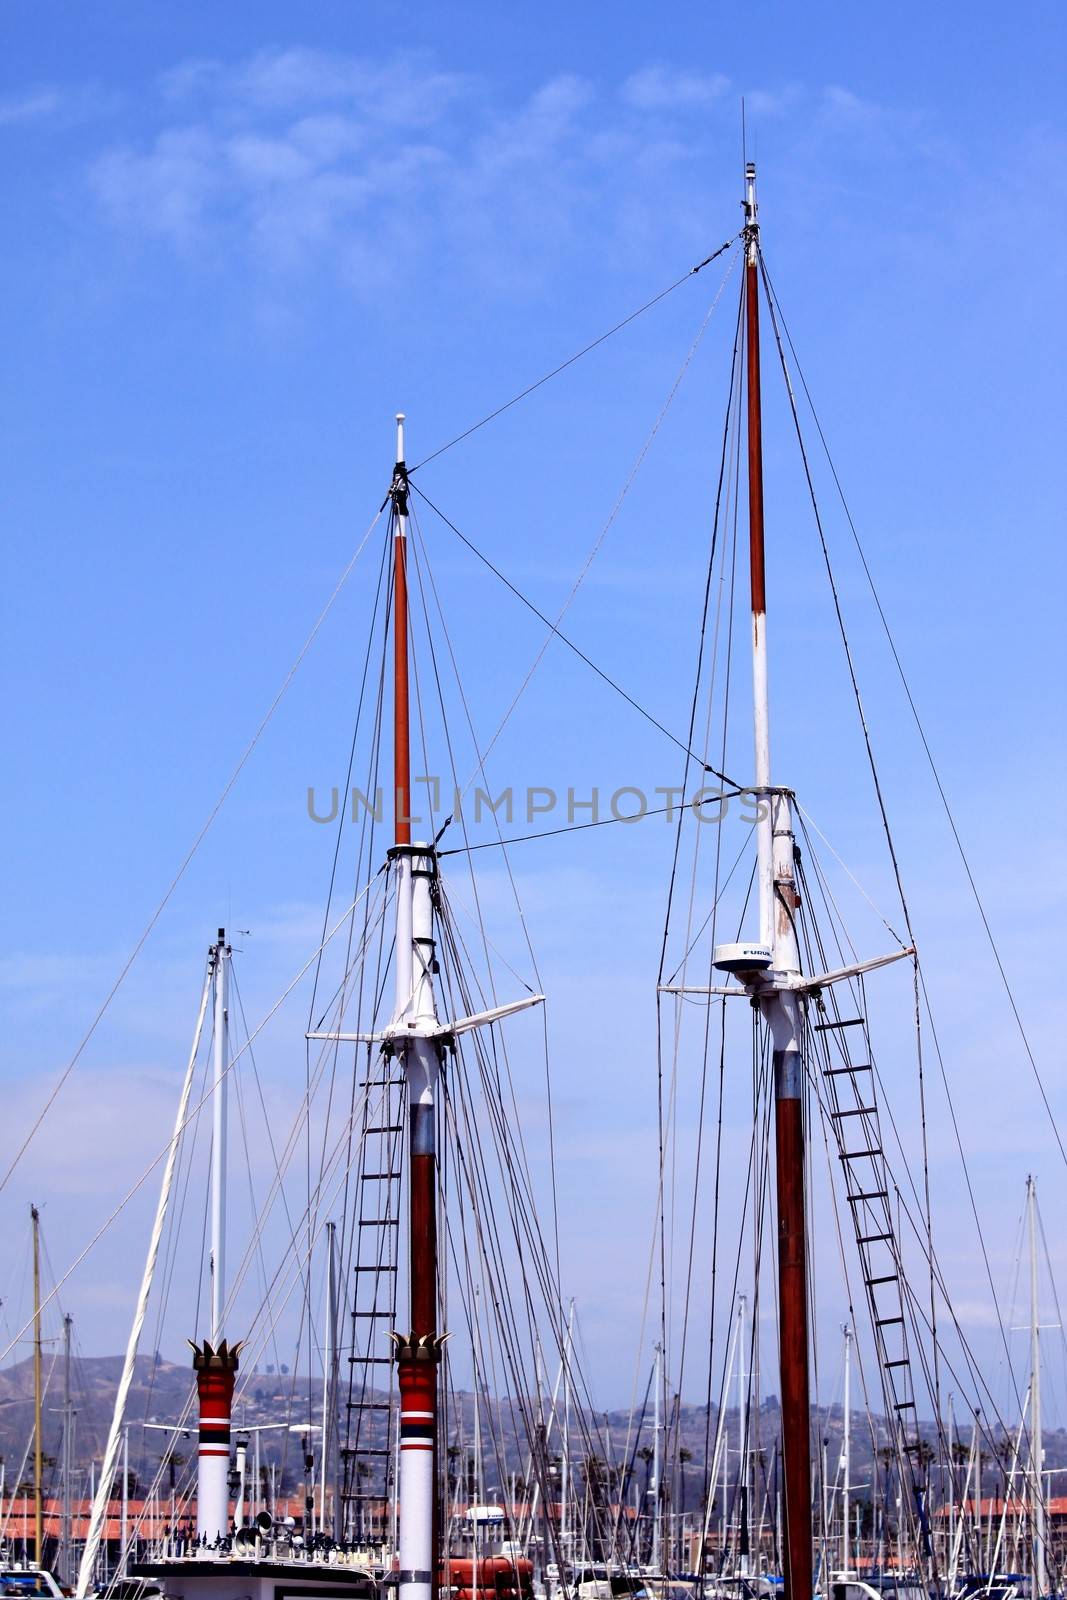 rigging of a sail boat with the blue sky in the background